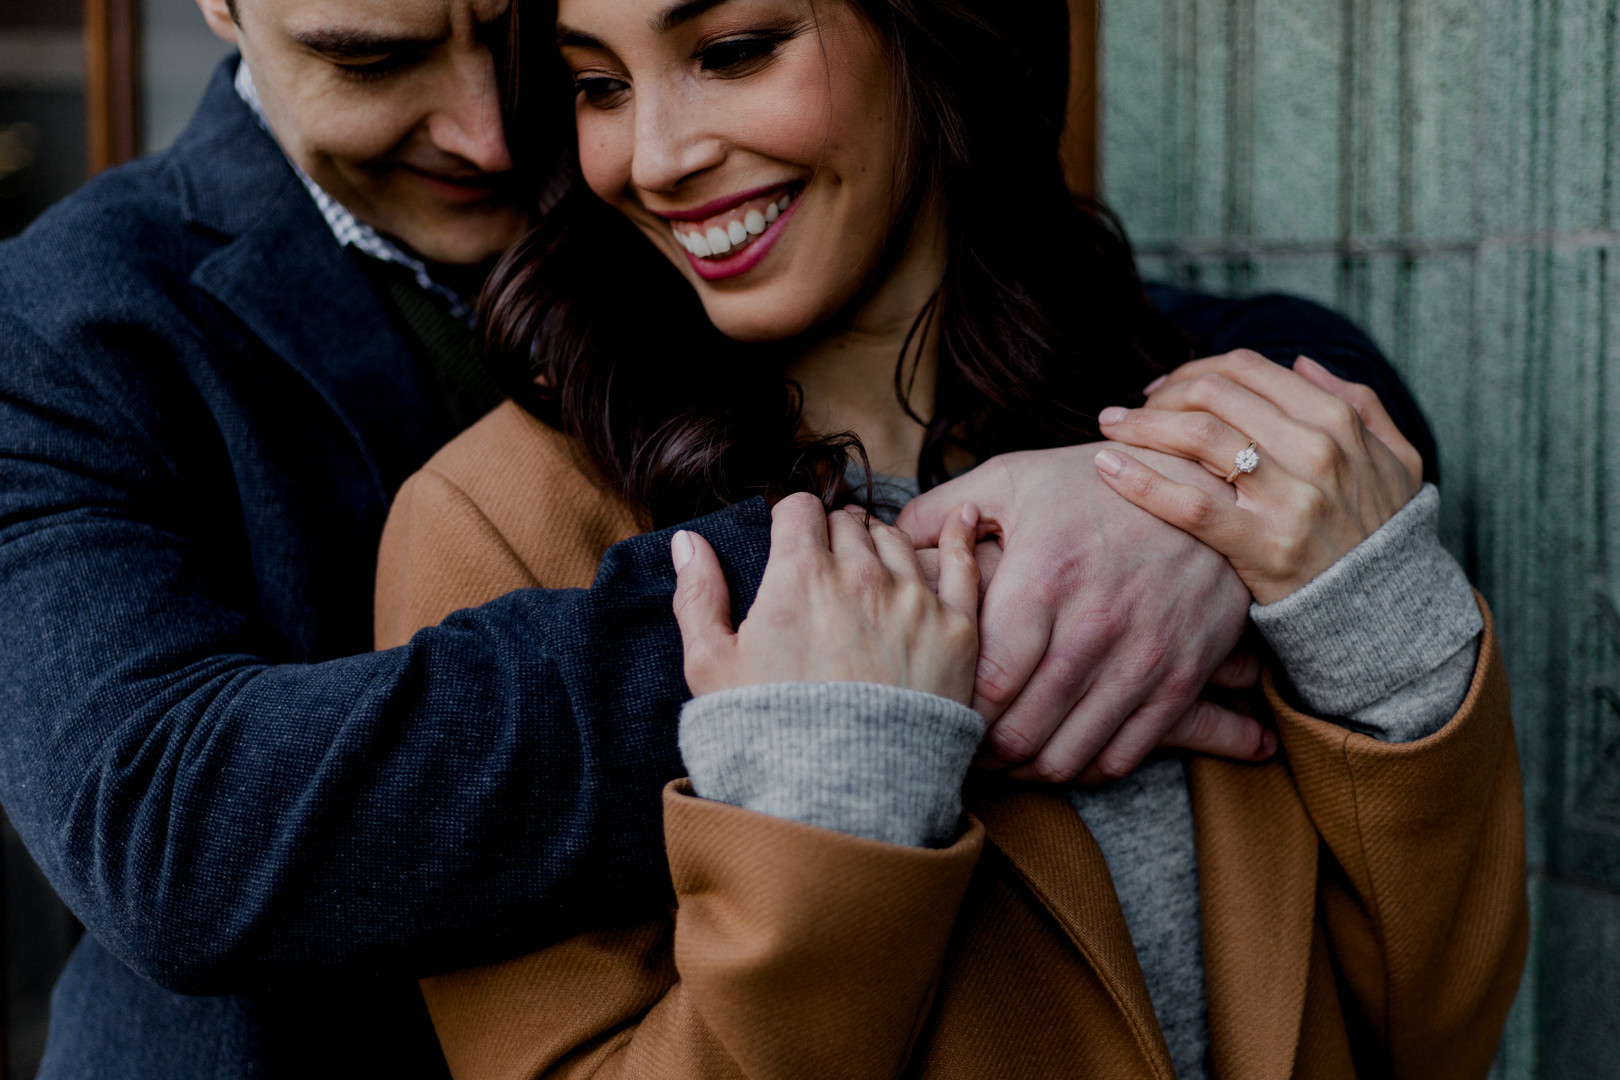 Chicago Engagement Shoot Amy Peppercorn Photography